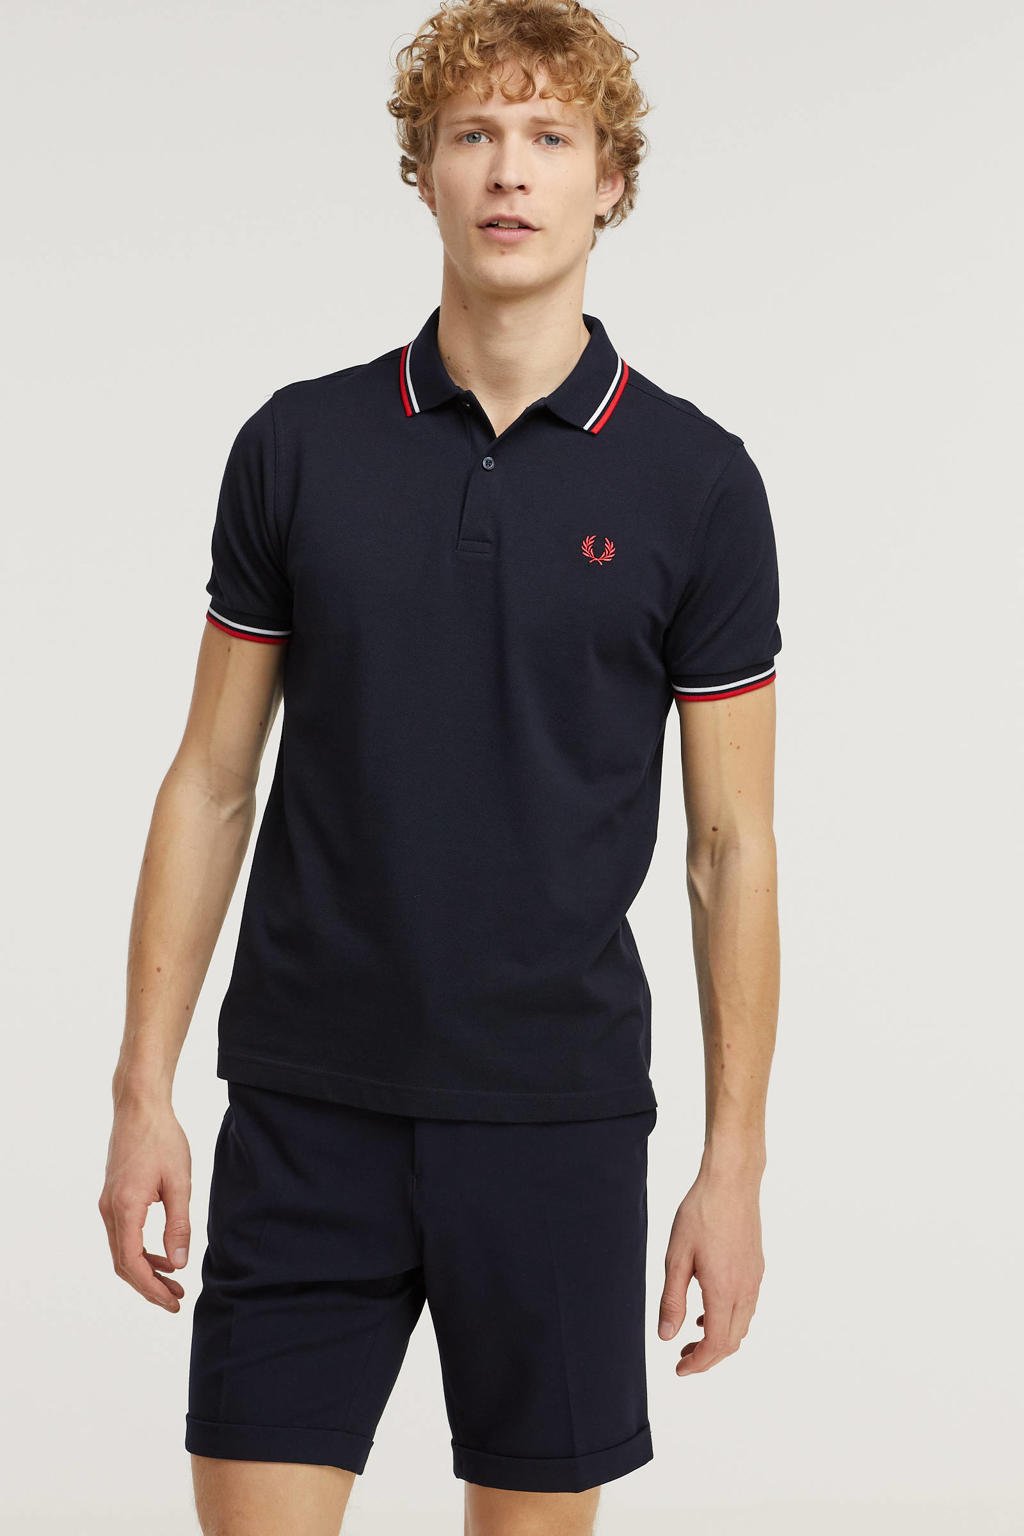 Fred Perry polo donkerblauw/wit/rood